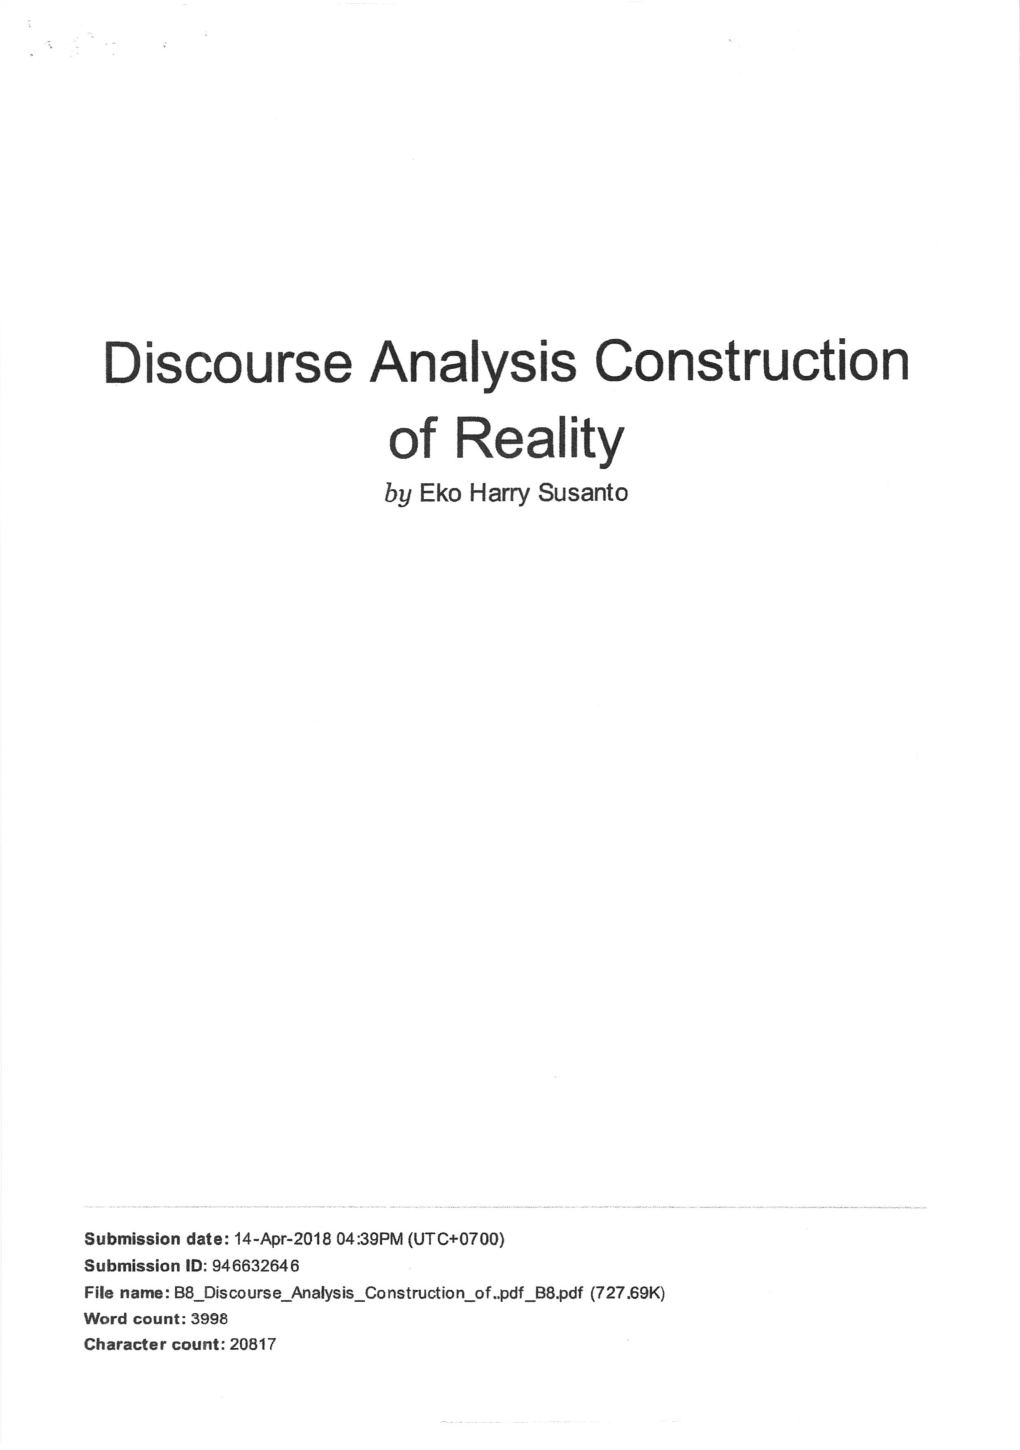 Discourse Analysis Construction of Reality by Eko Harry Susanto